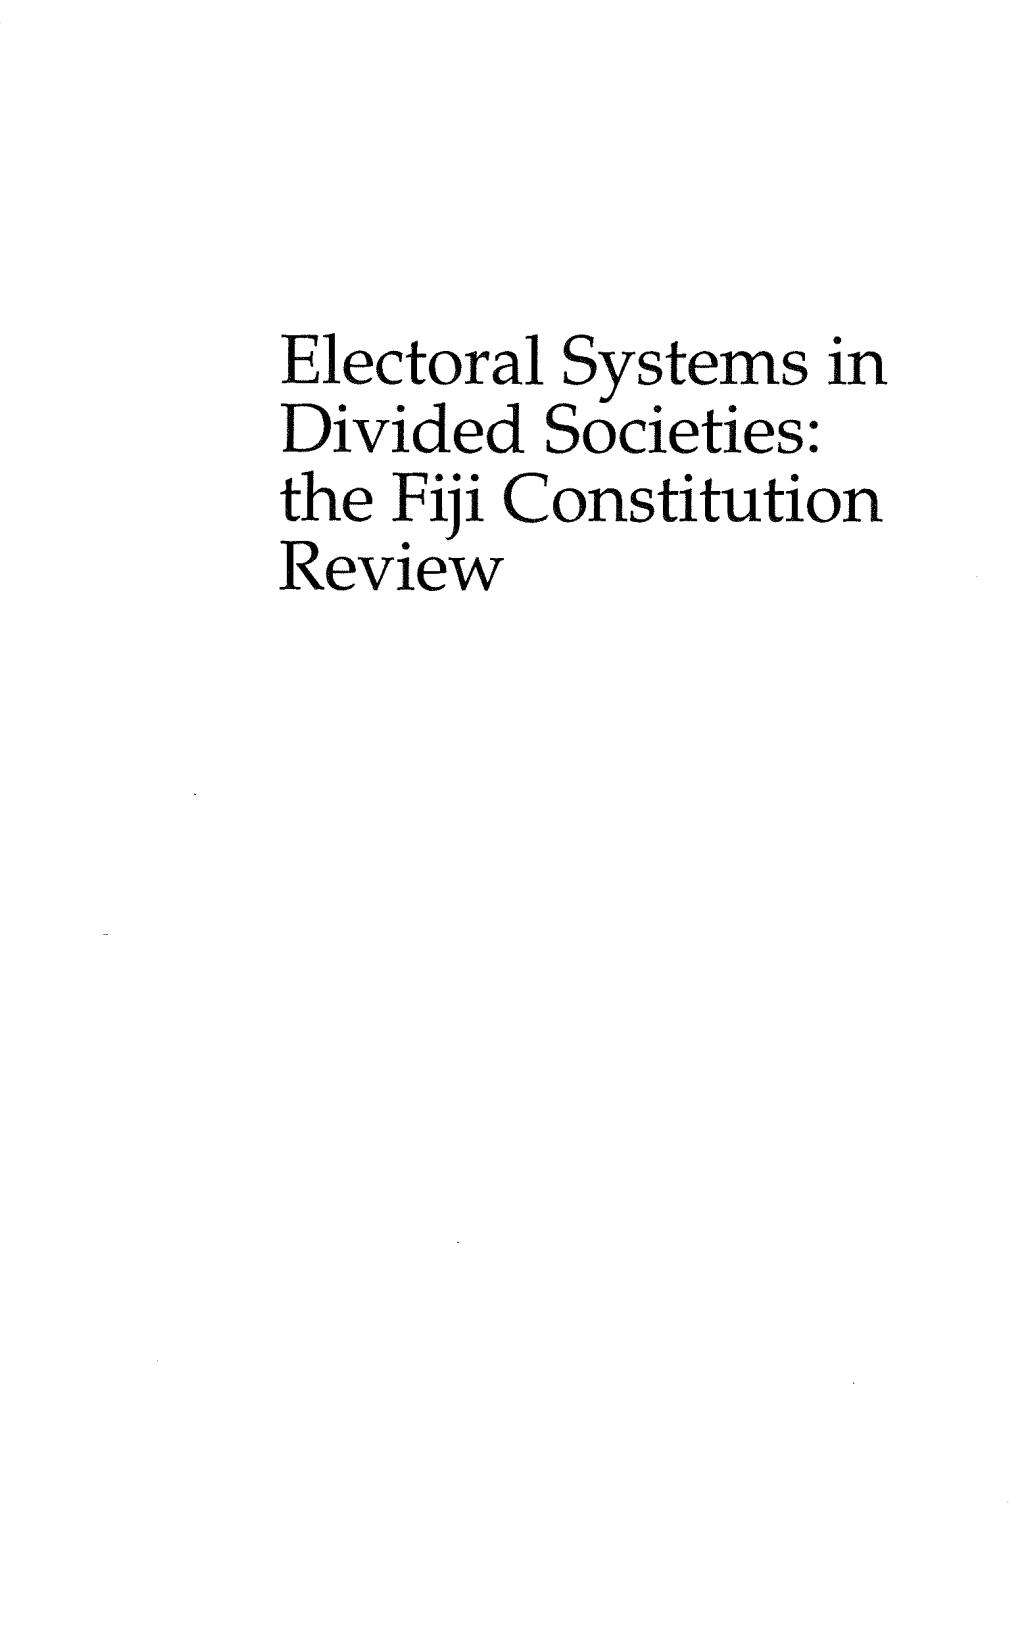 Electoral Systems in Divided Societies: the Fiji Constitution Review